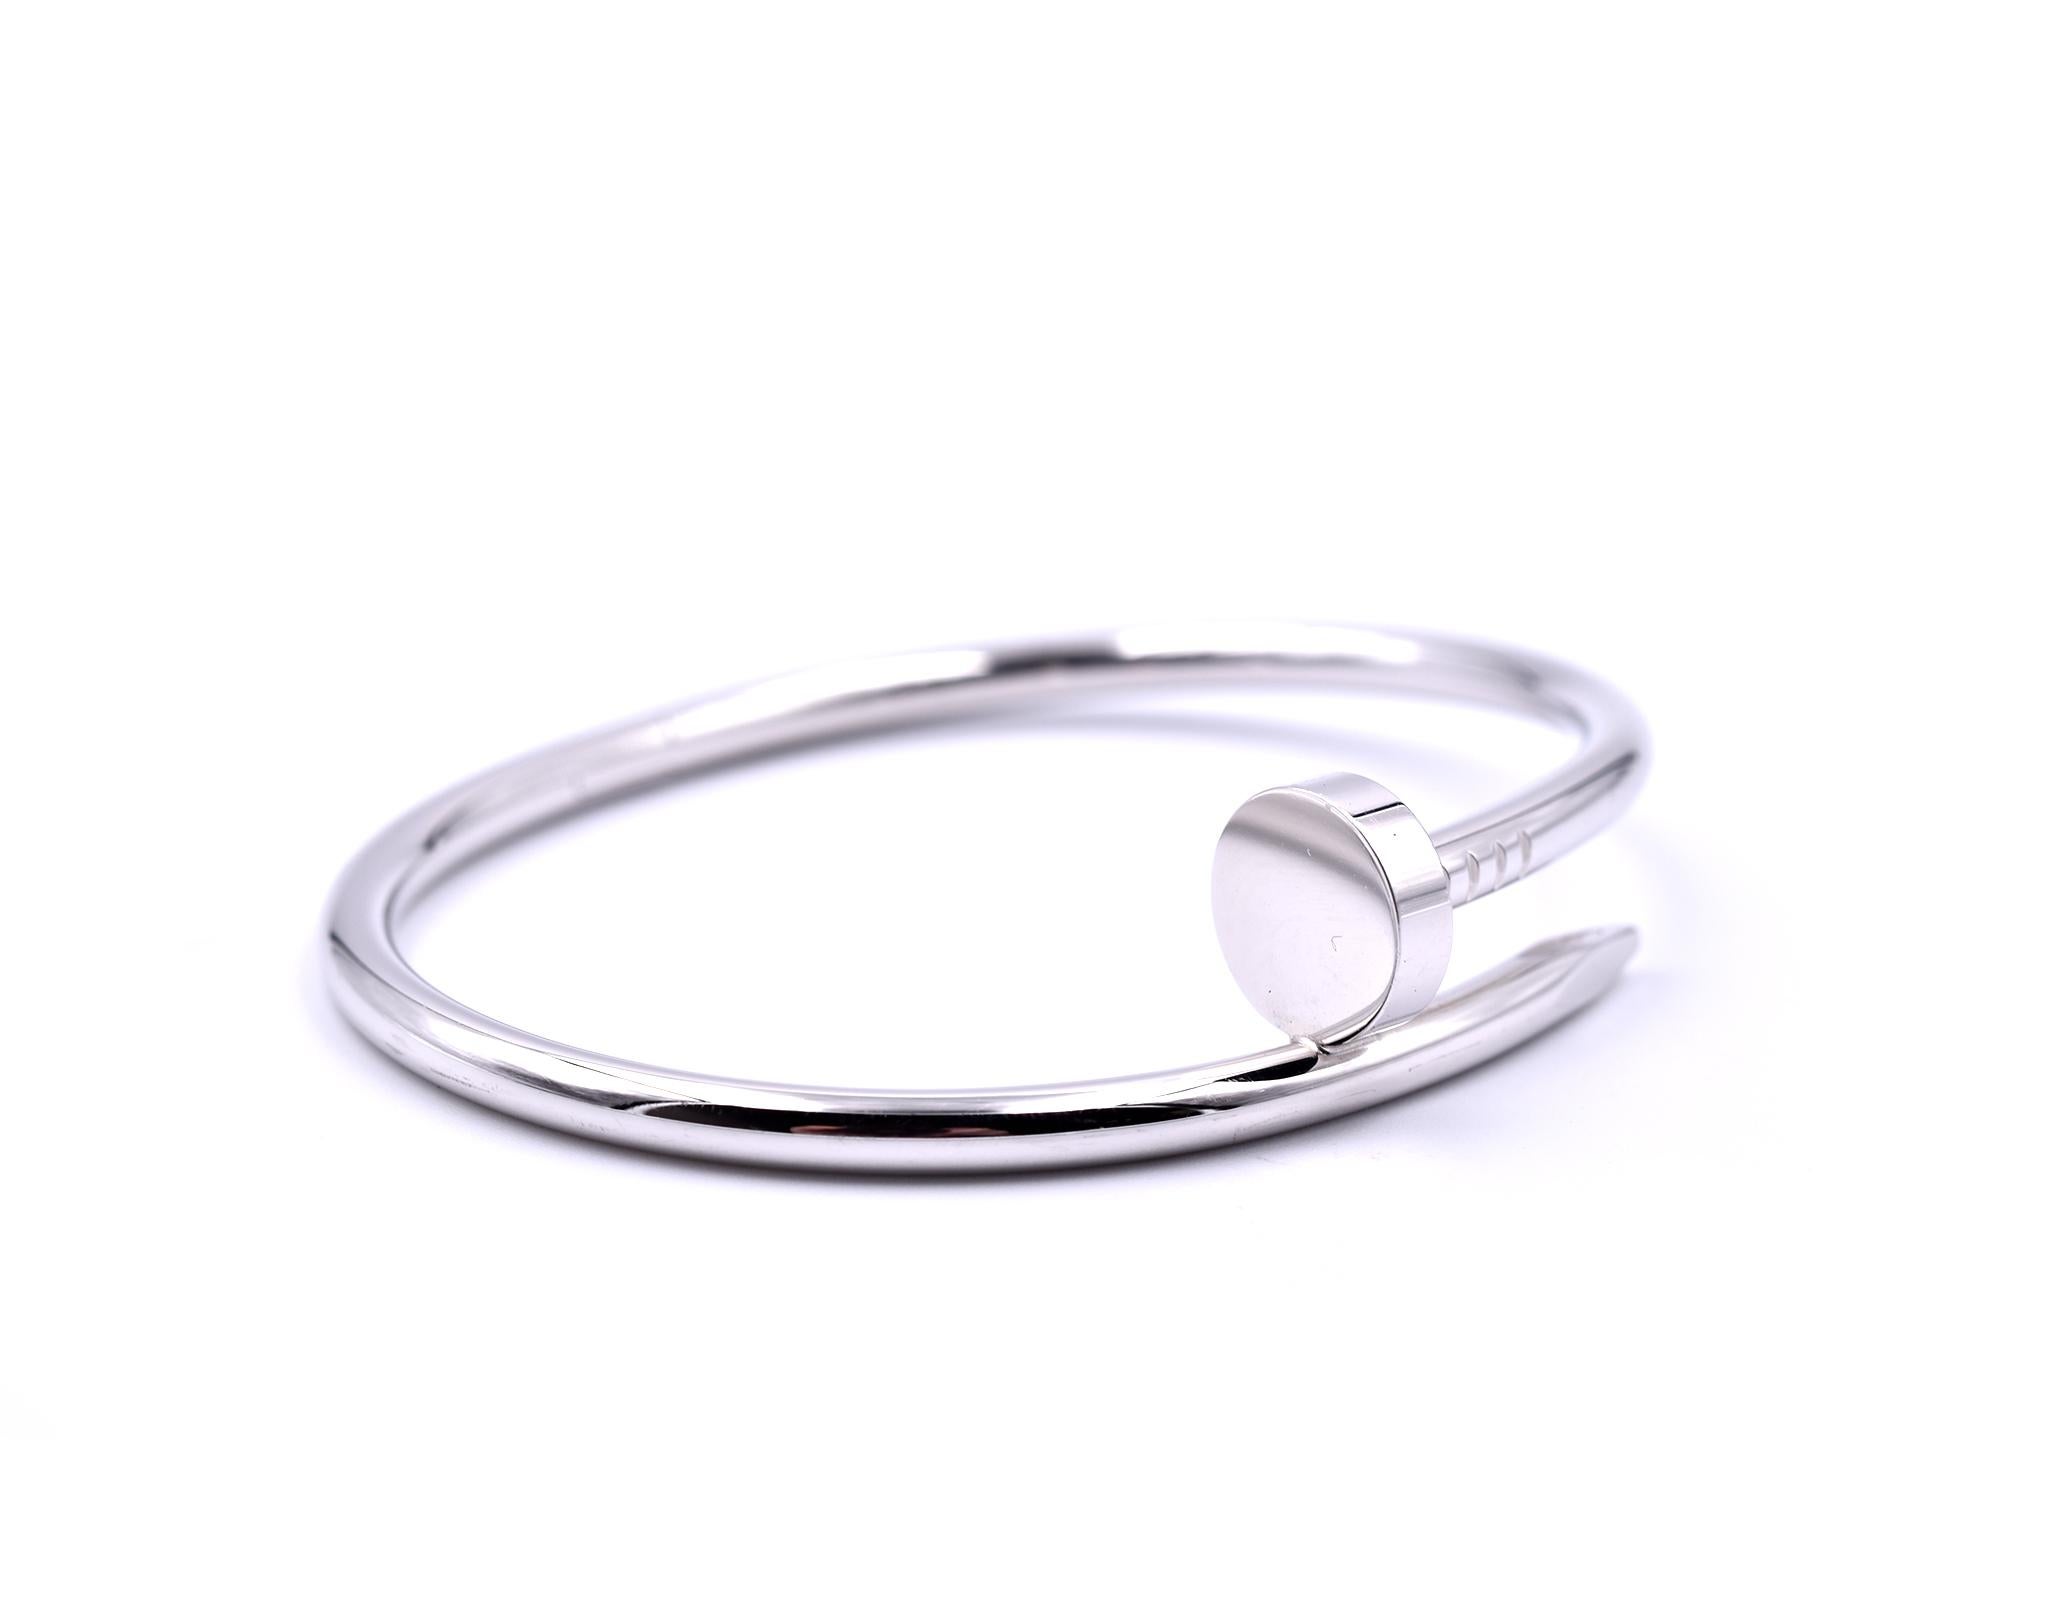 Designer: Cartier
Collection: Juste un Clou
Material: 18k white gold
Size: 17
Weight: 34.40 grams
Retail: $7,300
